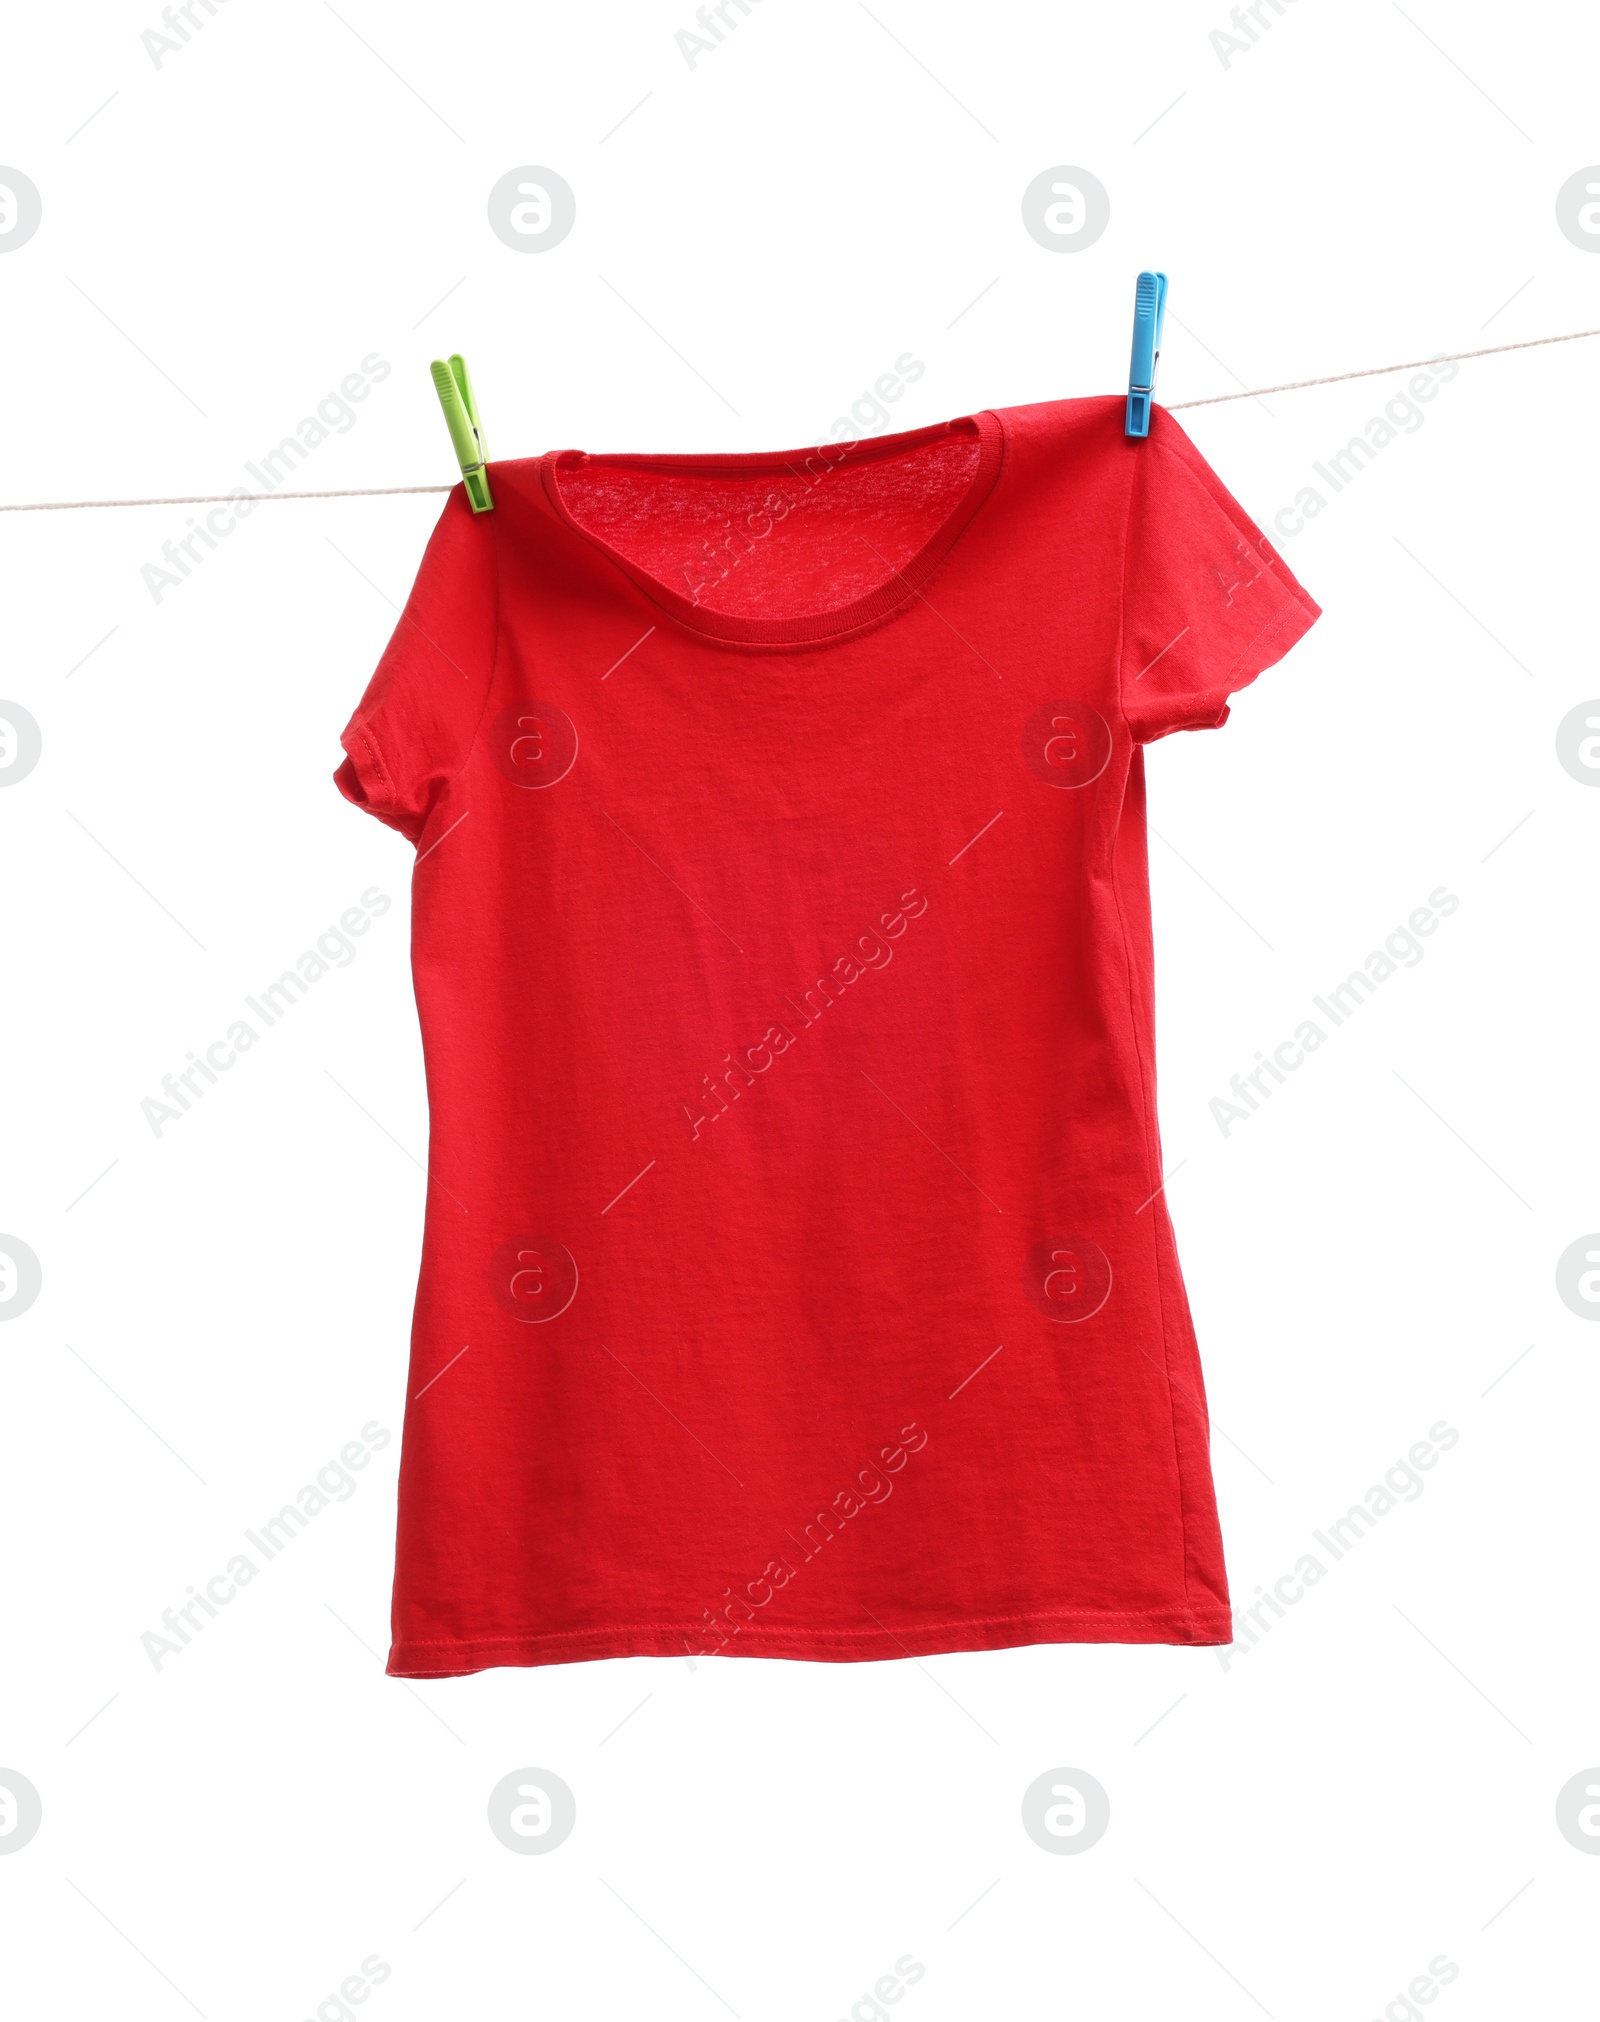 Photo of One red t-shirt drying on washing line isolated on white